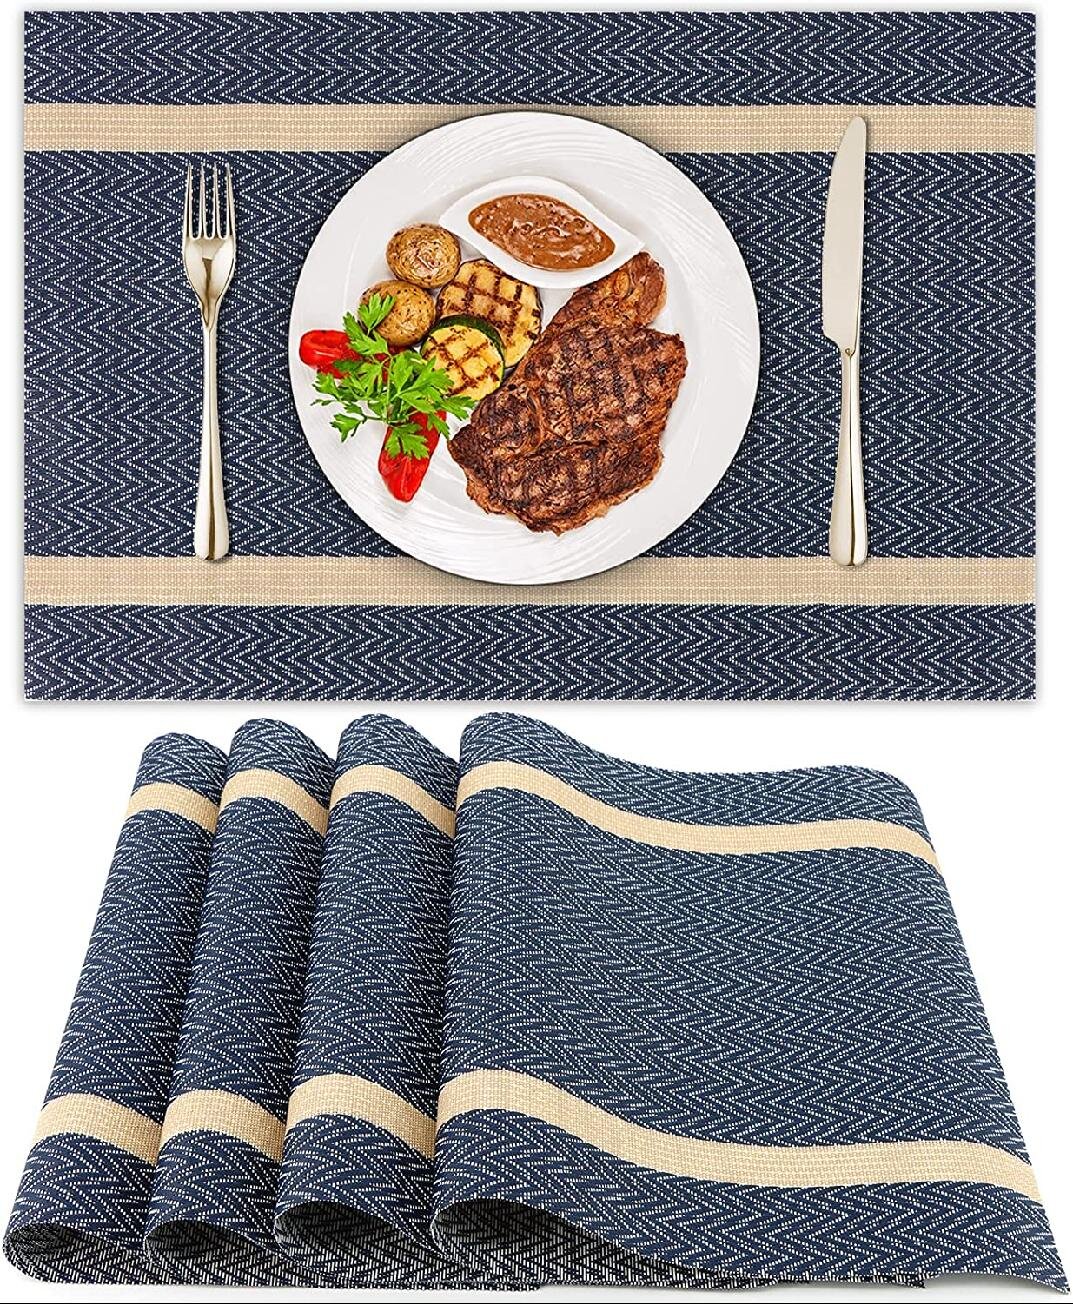 Placemats Woven Washable Heat Resistant Dinner Table Mat Non Slip17.7''X11.8''